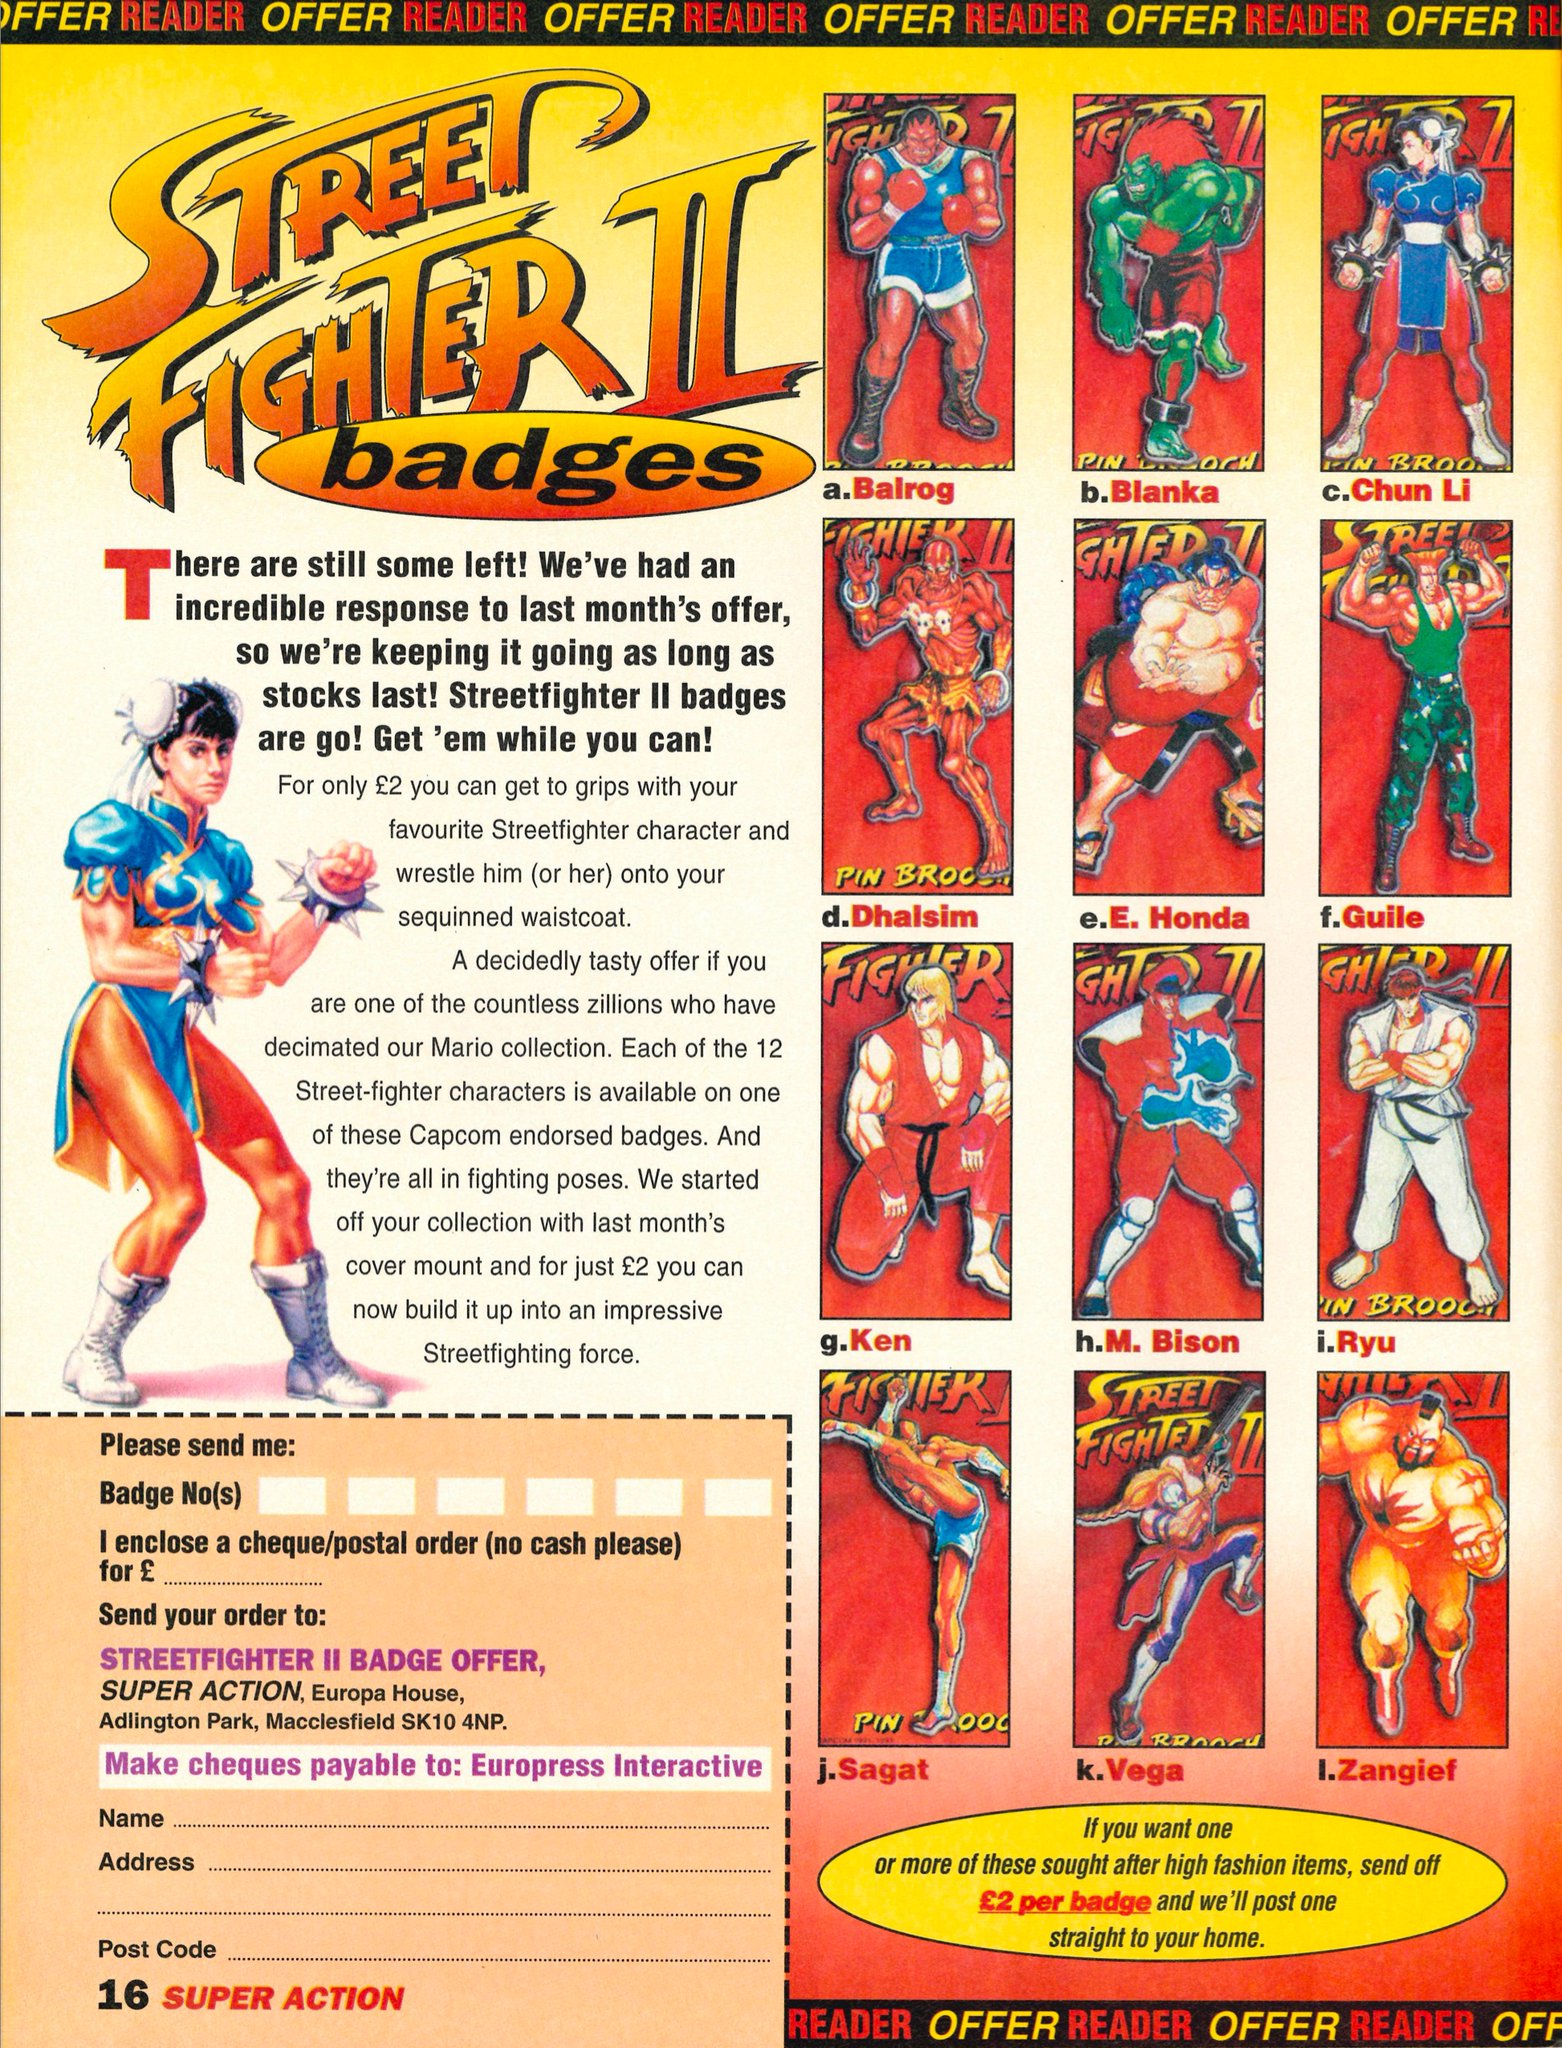 Here Comes A New Challenger on X: Super Action magazine in August '93  provide a mini guide to Street Fighter 2 on the SNES. They detail how to  defeat M. Bison with